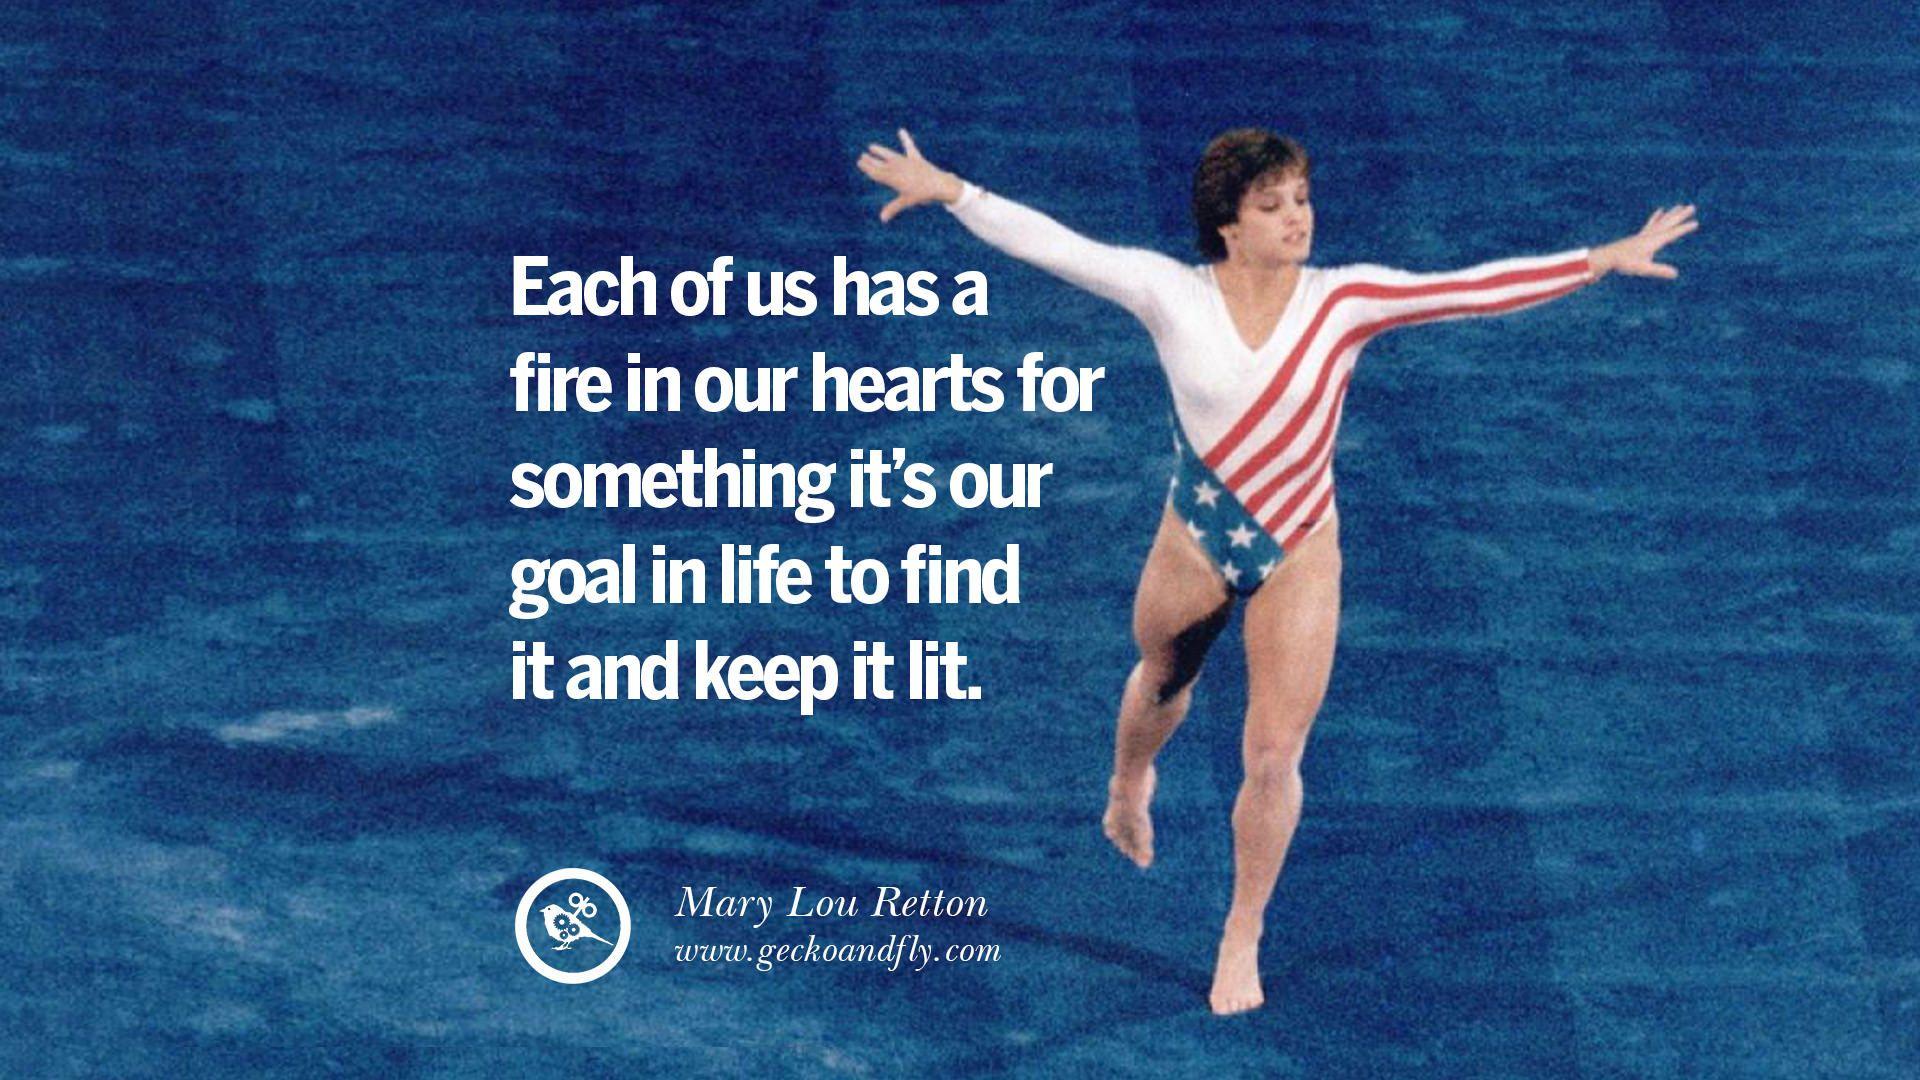 Inspirational Quotes By Olympic Athletes On The Spirit Of